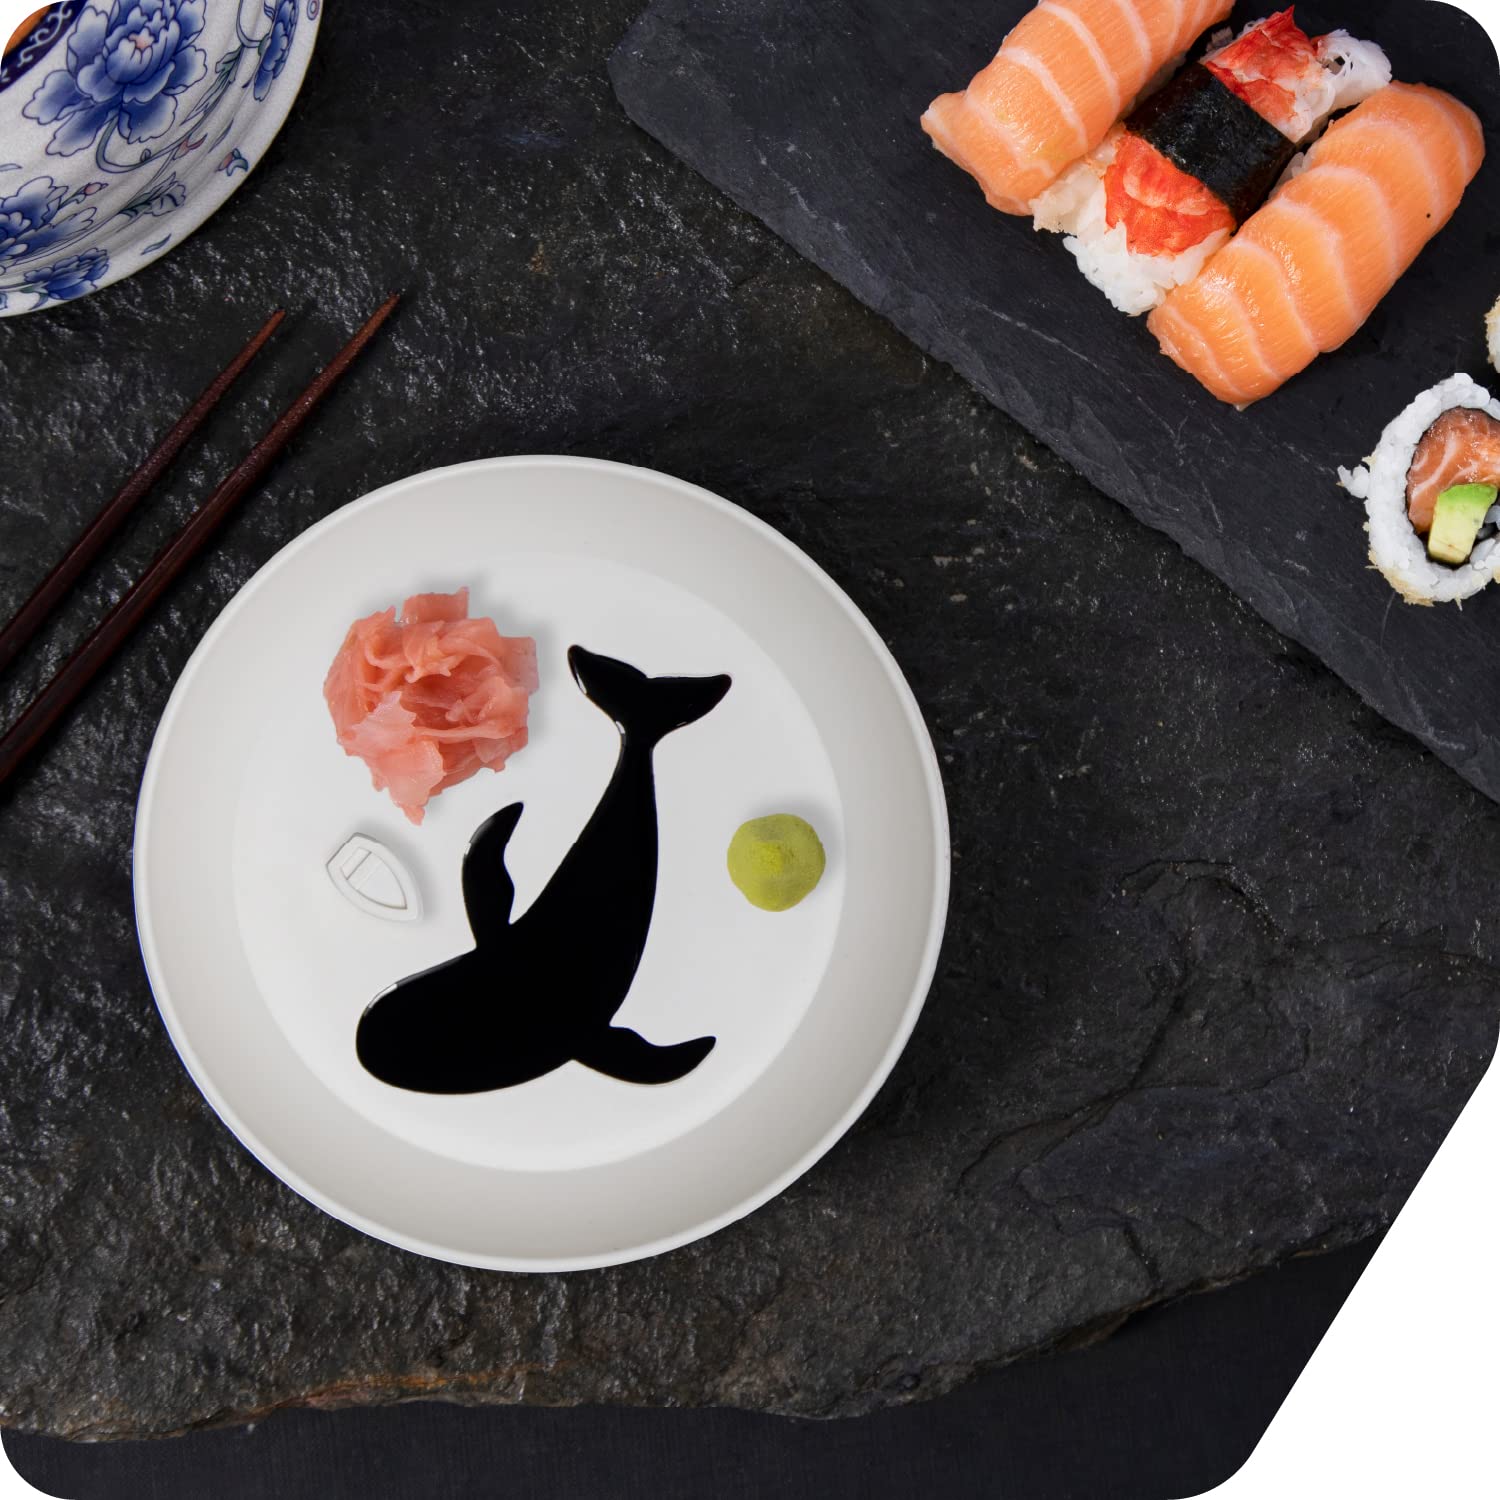 PELEG DESIGN Dip Sea Whale Dipping Dish Balsamic and Olive Oil Soy Sauce Plate Round Dipping Sauce Bowl Dipping Dish Plate (White)